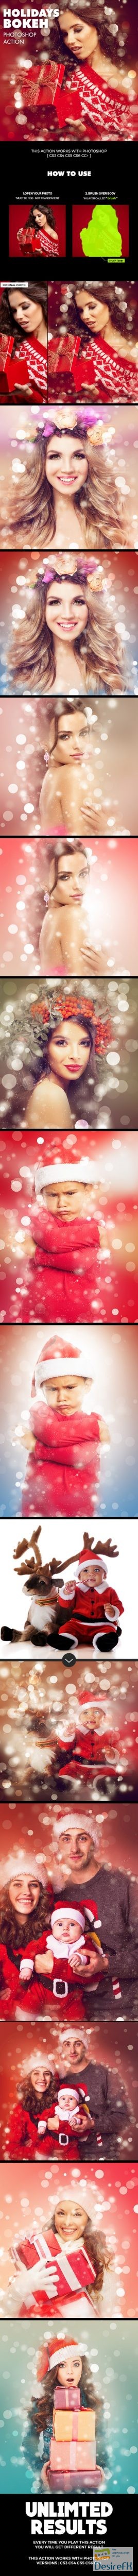 GraphicRiver - Holidays Bokeh Photoshop Action 21054884